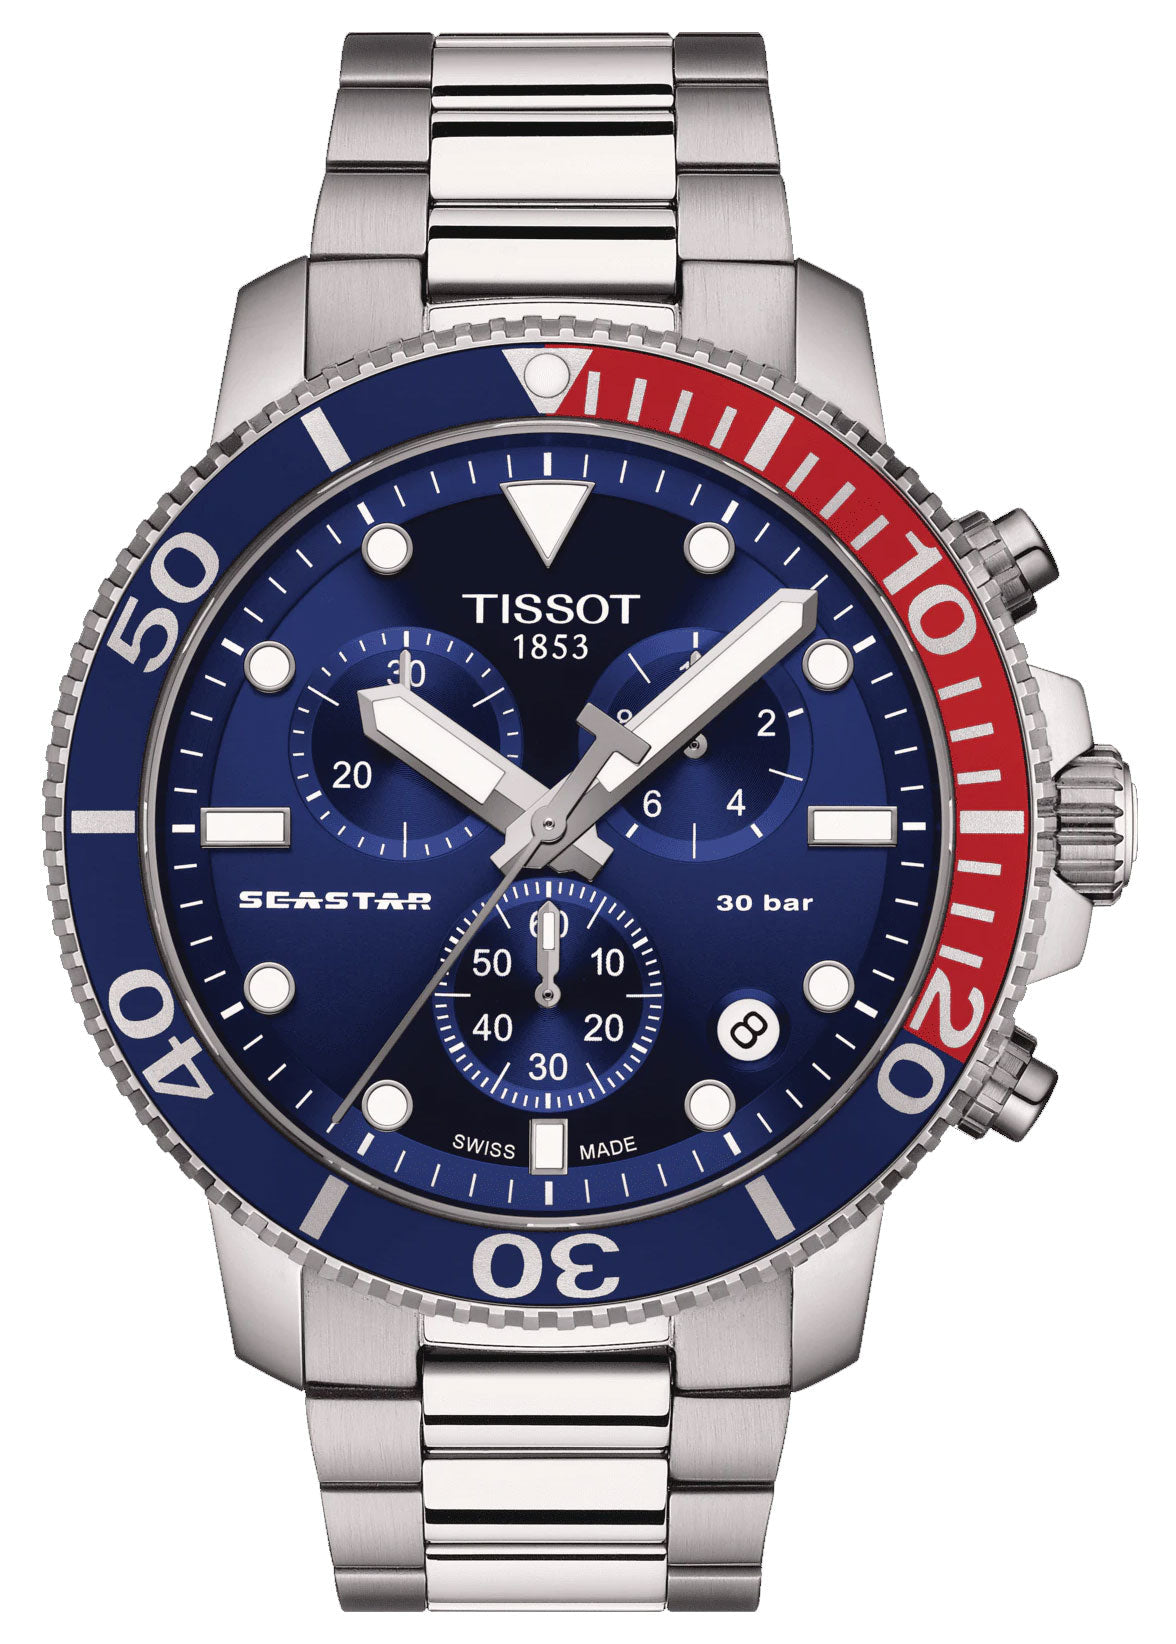 update alt-text with template Watches - Mens-Tissot-T120.417.11.041.03-40 - 45 mm, 45 - 50 mm, blue, chronograph, date, divers, mens, menswatches, new arrivals, round, rpSKU_T120.417.11.041.01, rpSKU_T120.417.11.091.00, rpSKU_T120.417.11.091.01, rpSKU_T120.417.11.421.00, rpSKU_T120.417.17.041.00, Seastar, seconds sub-dial, stainless steel band, stainless steel case, swiss quartz, Tissot, uni-directional rotating bezel, watches-Watches & Beyond